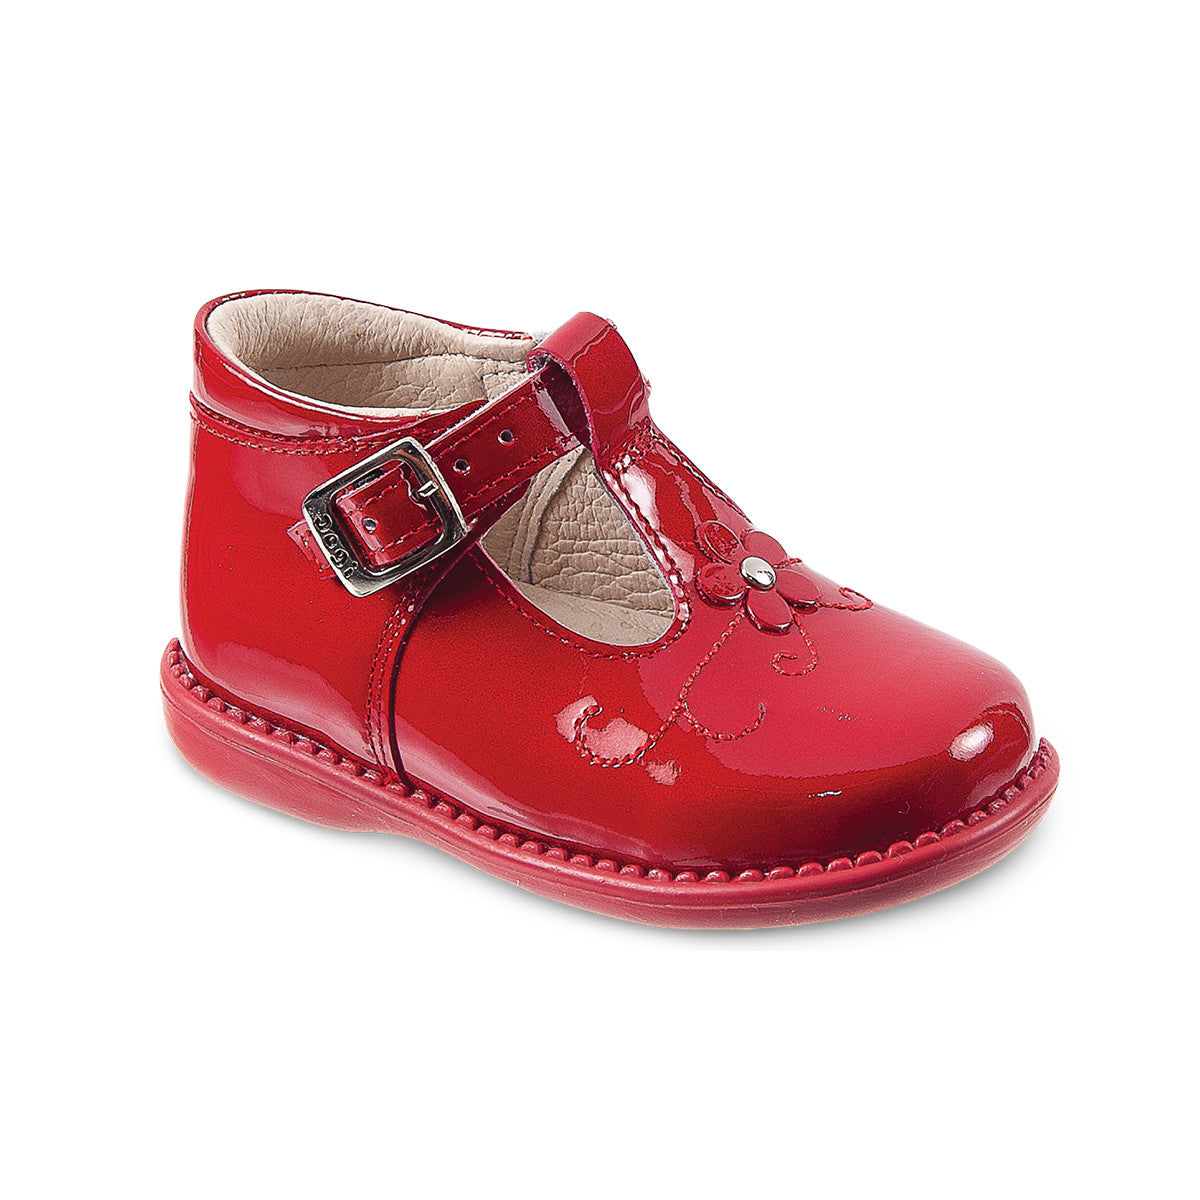 patent leather infant shoes